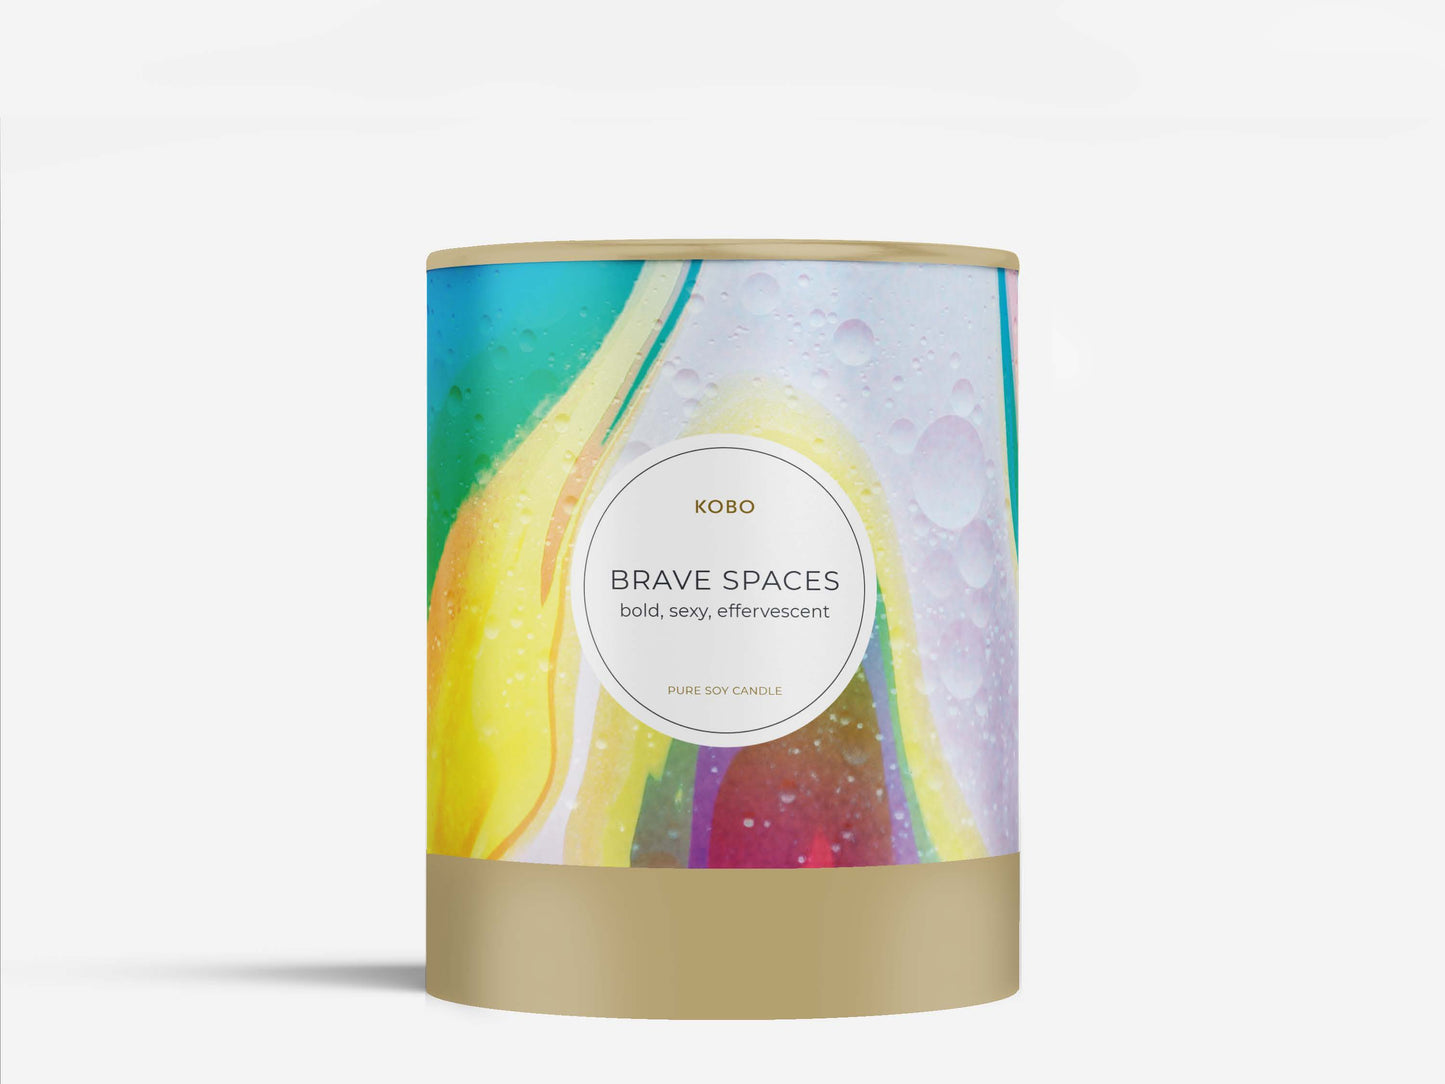 Brave Spaces Limited Edition 11 oz Pure Soy Pride Candle